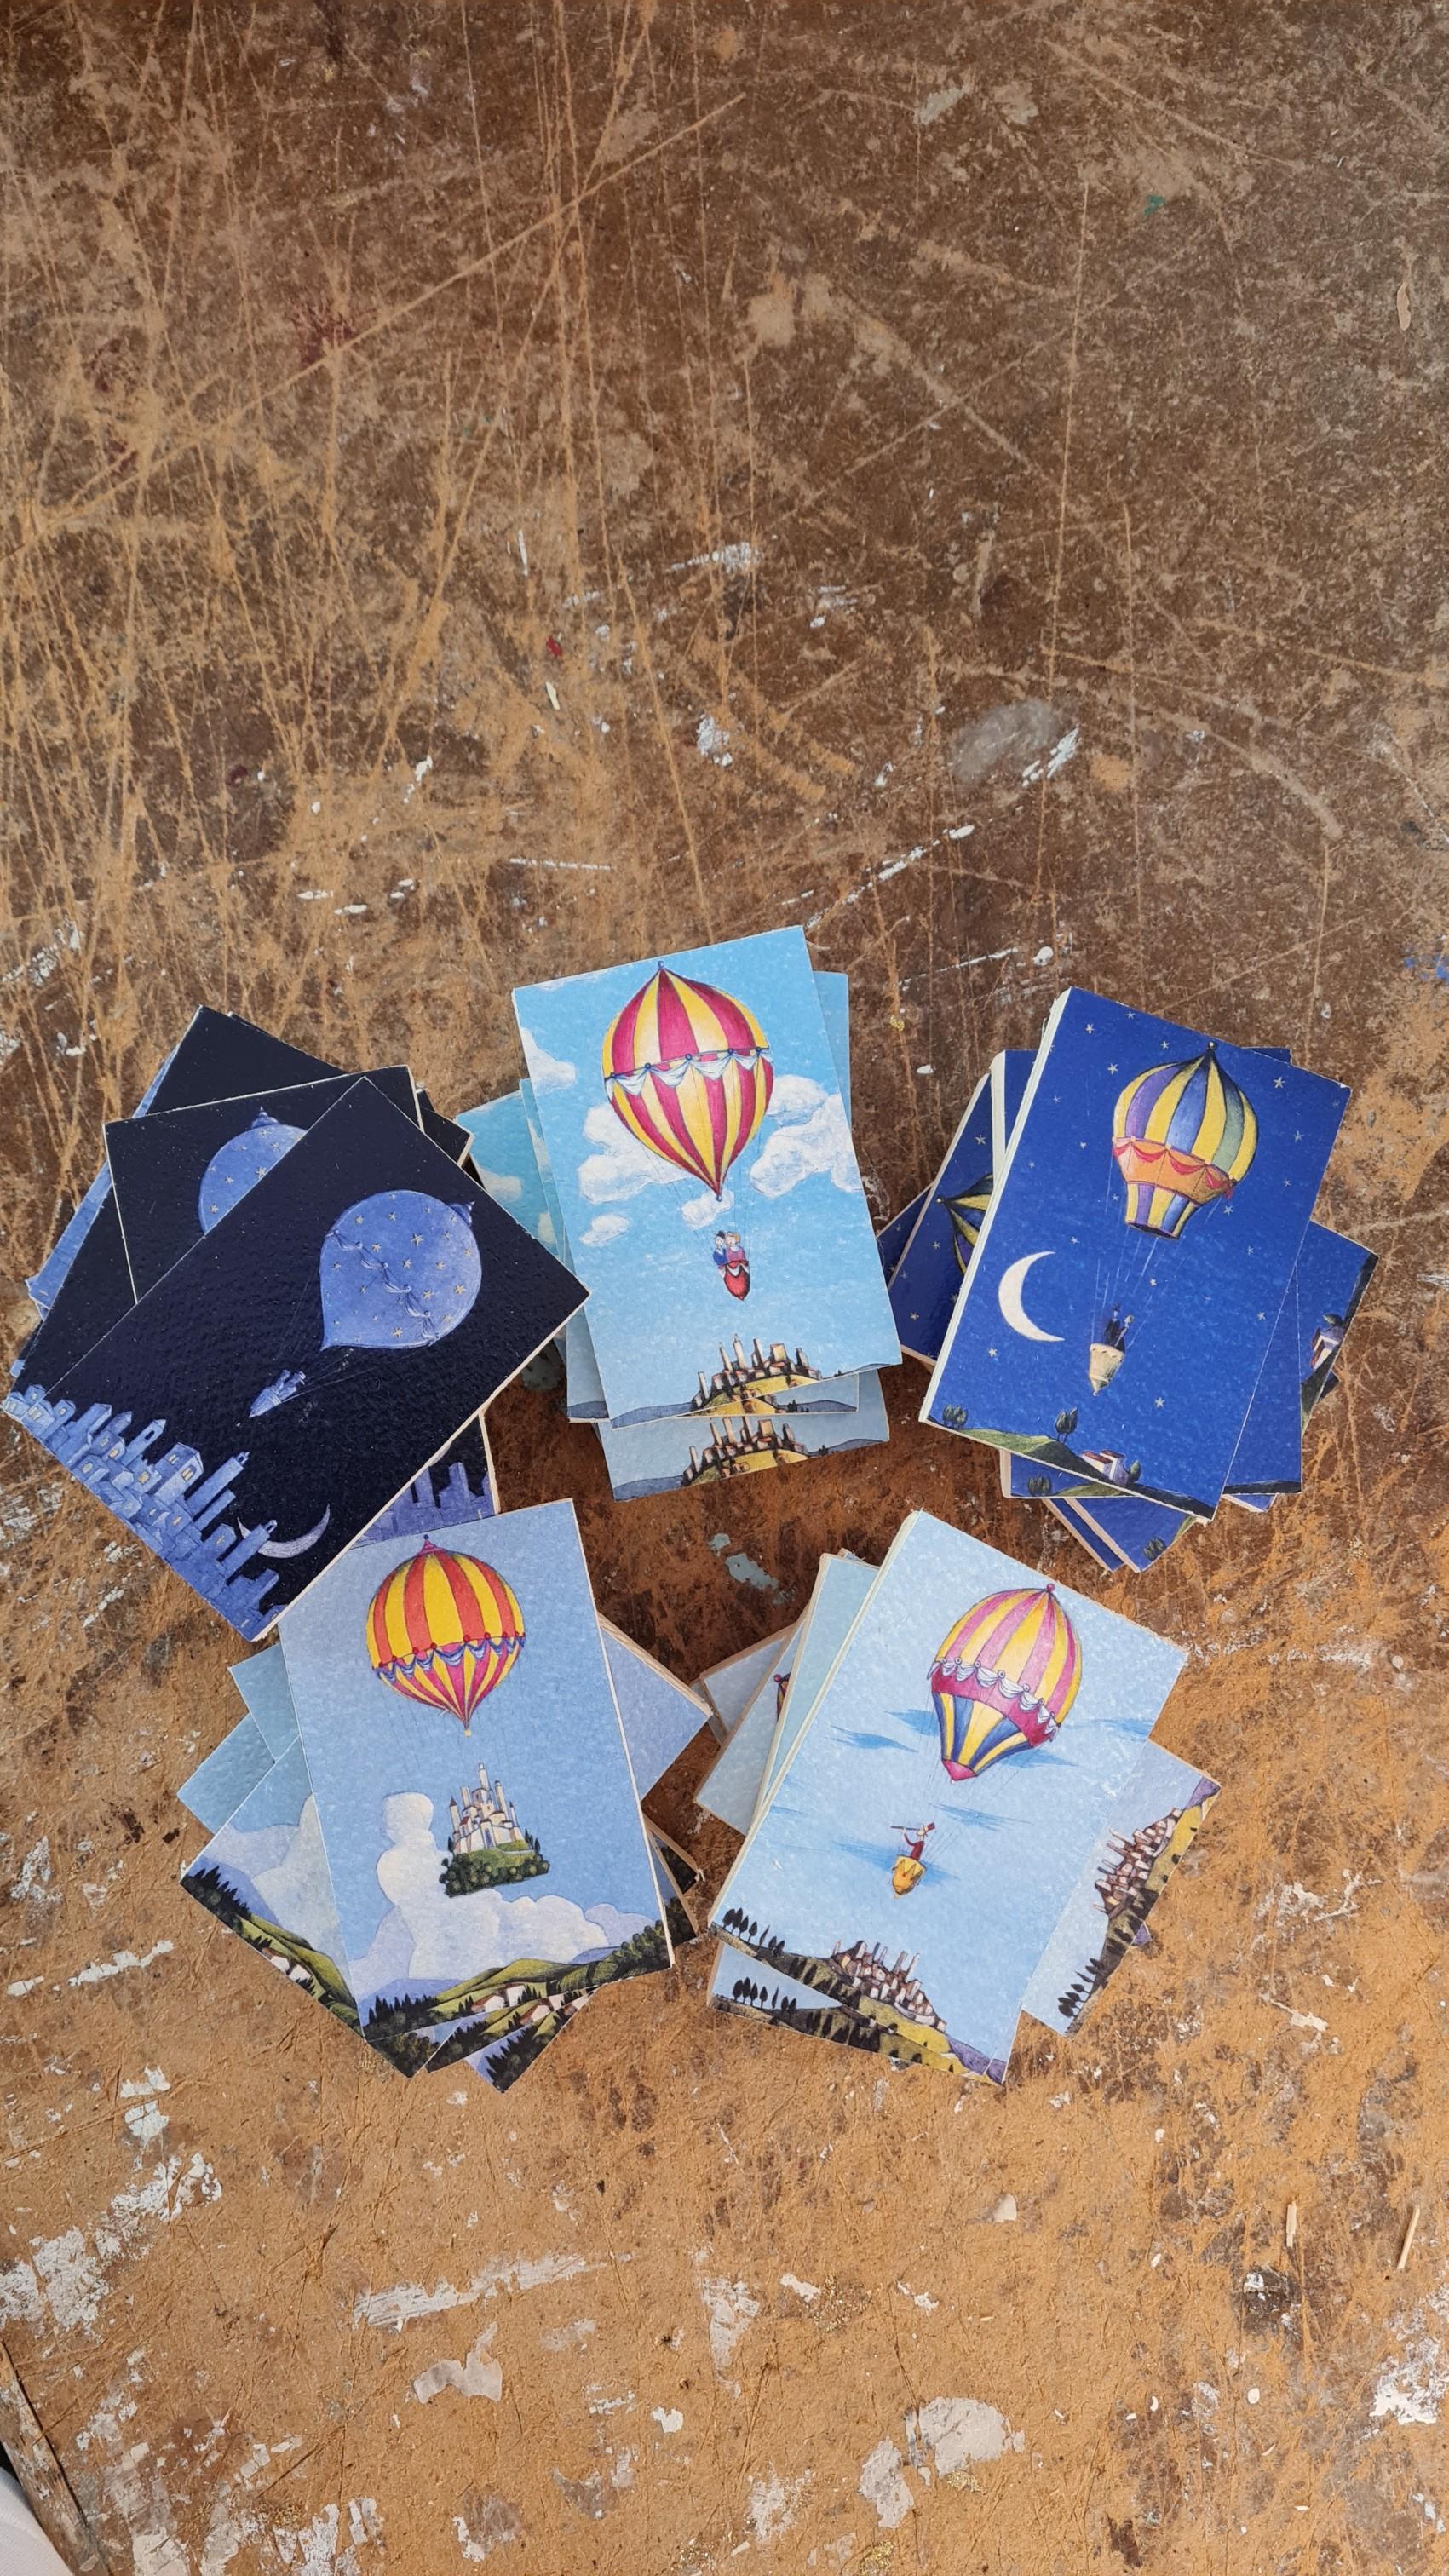 Magneti Mongolfiere - Hot air balloons magnets